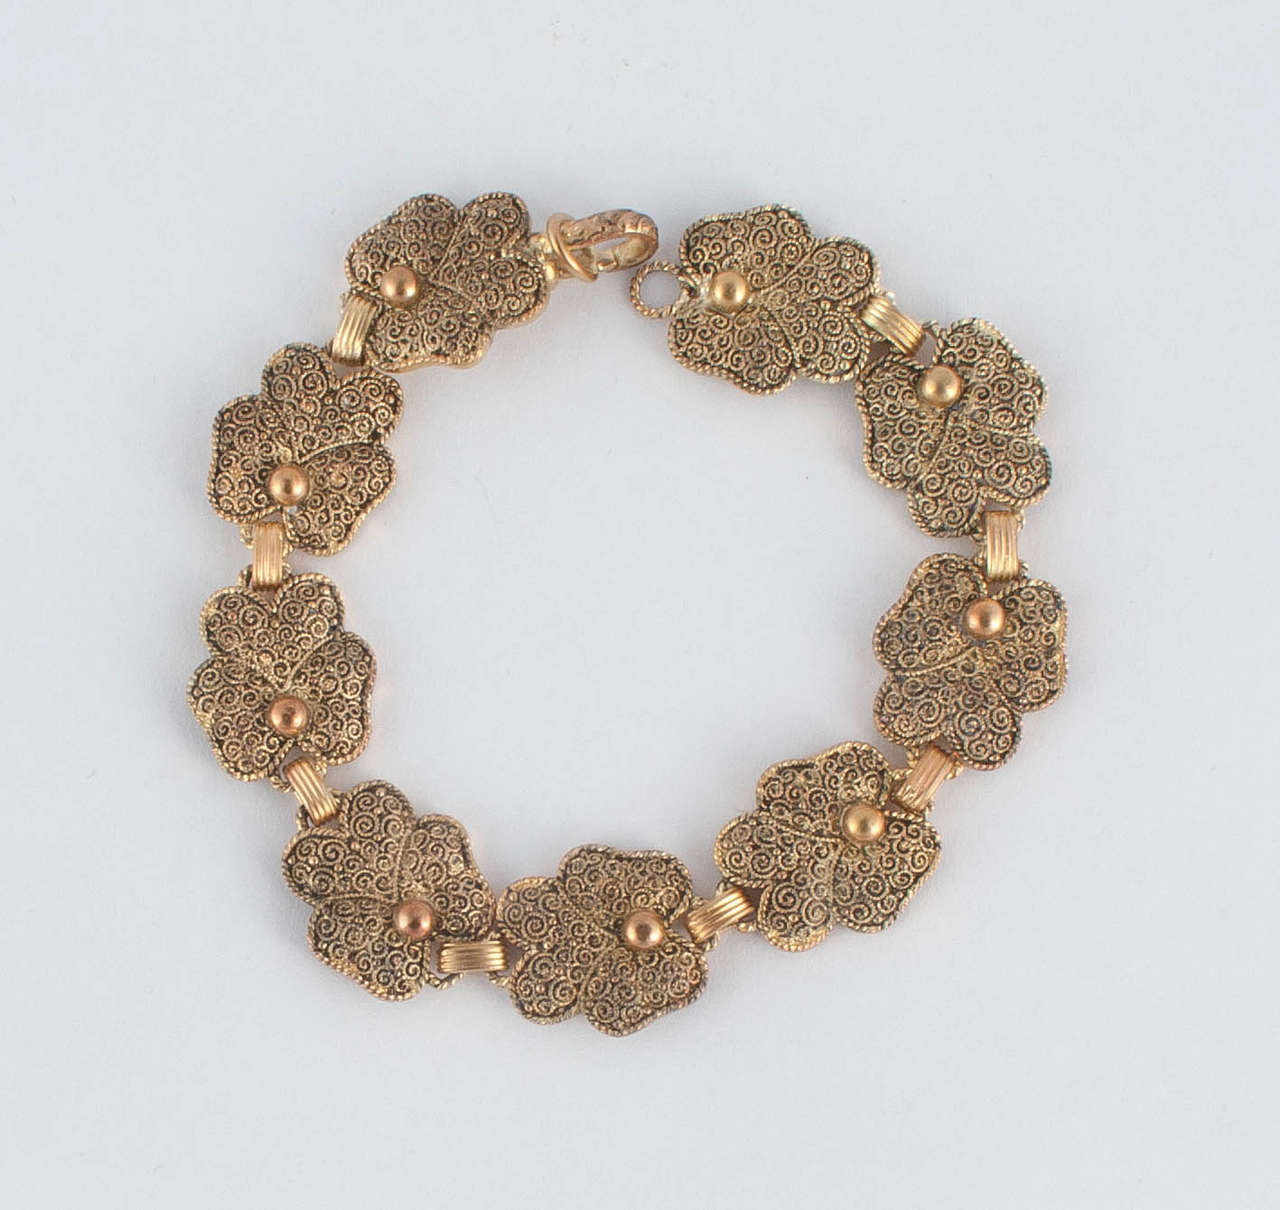 Lovely pansy motif bracelet by Theodor Fahrner in silver gilt. The intricate swirl motif on the petals gives the bold design of the piece a delicate appearance. The clasp is stamped with the 